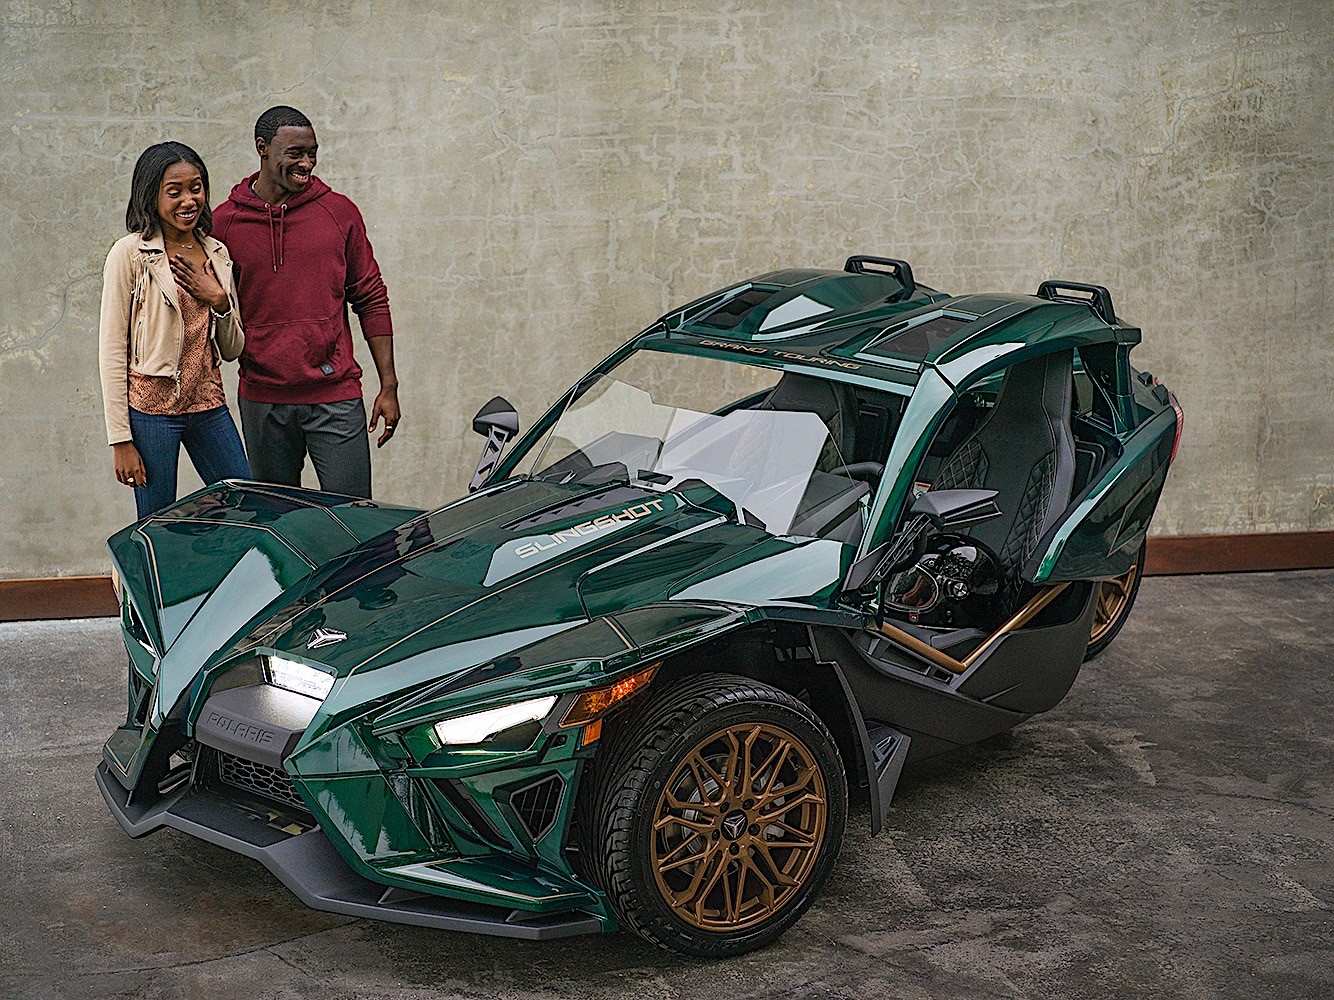 2020 Polaris Slingshot Grand Touring LE Is the New Face of Fun